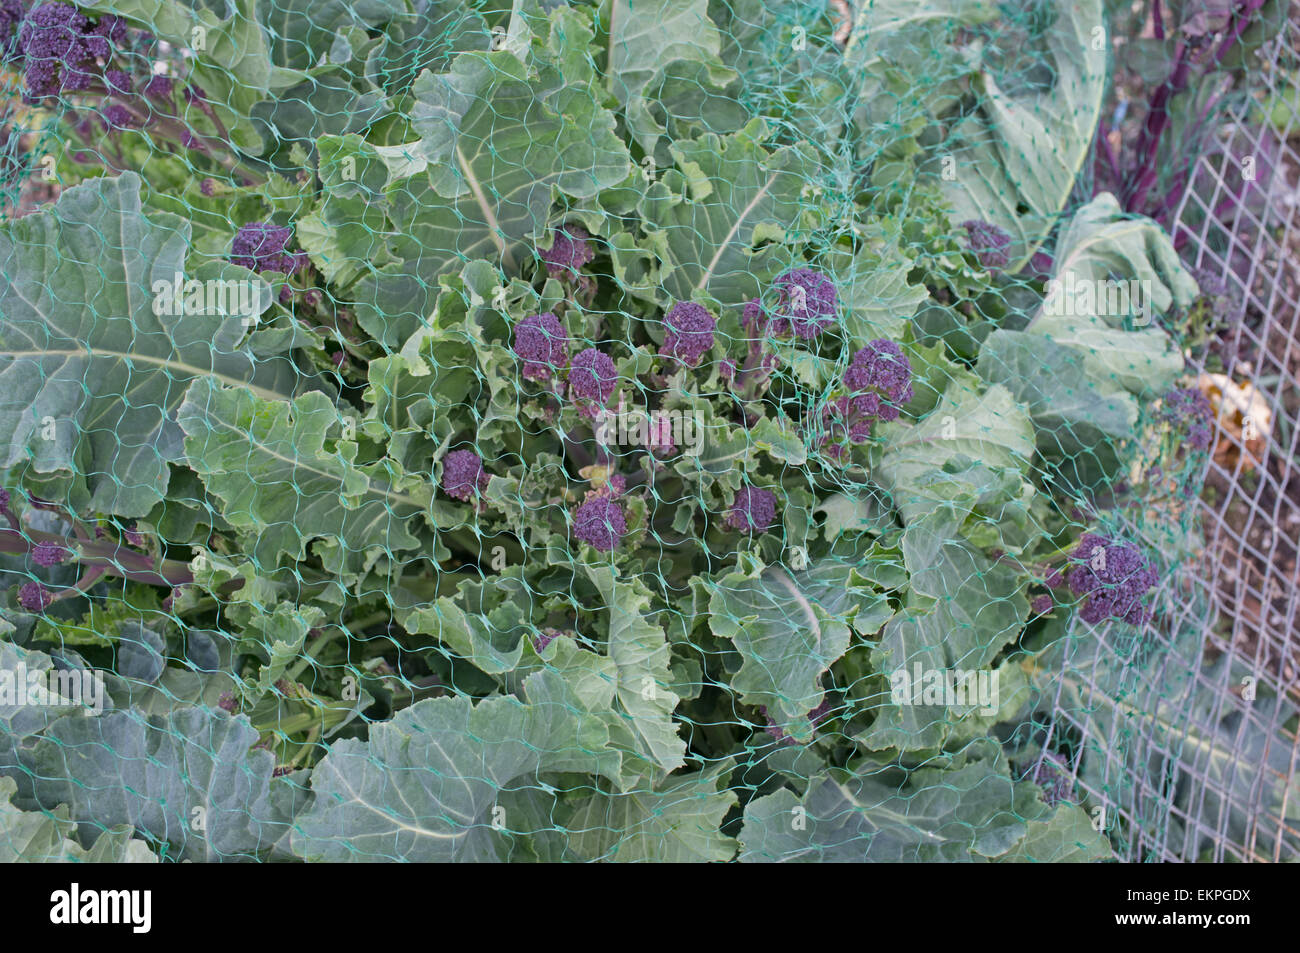 Purple sprouting broccoli protected by wire and netting to repel pigeons Stock Photo